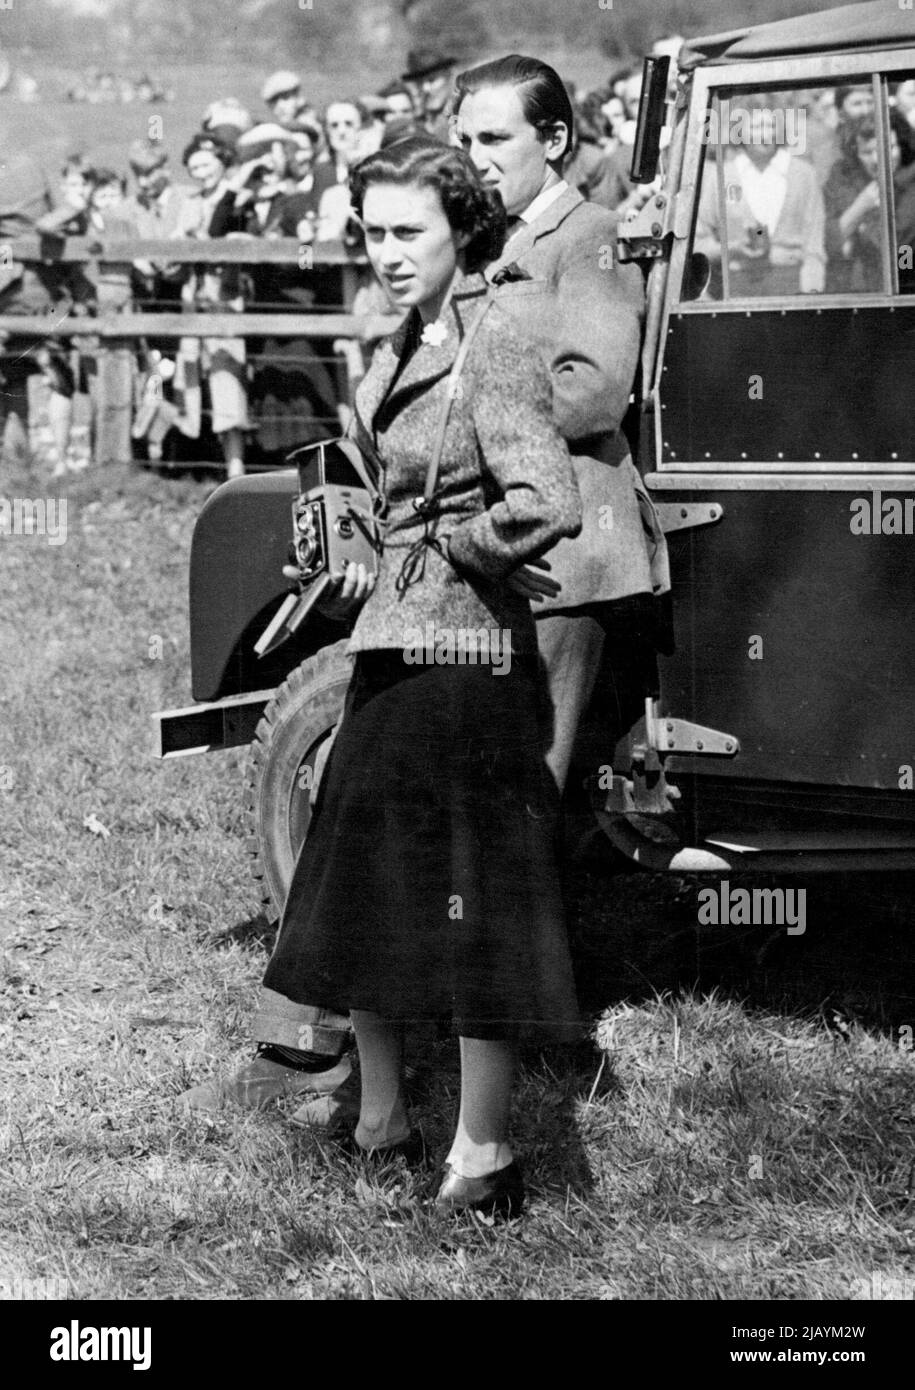 Princess Margaret At Badminton - H.R.H. Princess Margaret keenly interested as she stands with her camera ready at one of the jumps of the Cross Country course at Badminton yesterday. With the Princes is Mr. David Somerset, a cousin of the Duke of Beaufort. H.N. The Queen, Princess Margaret and other members of the Royal Family again attended the International Horse Trials at Badminton yesterday. At this, the second day of three-day event, the Royal visitors watched the Cross Country, Speed and Endurance tests in bright Spring sunshine. April 24, 1953. (Photo by Fox Photos). Stock Photo